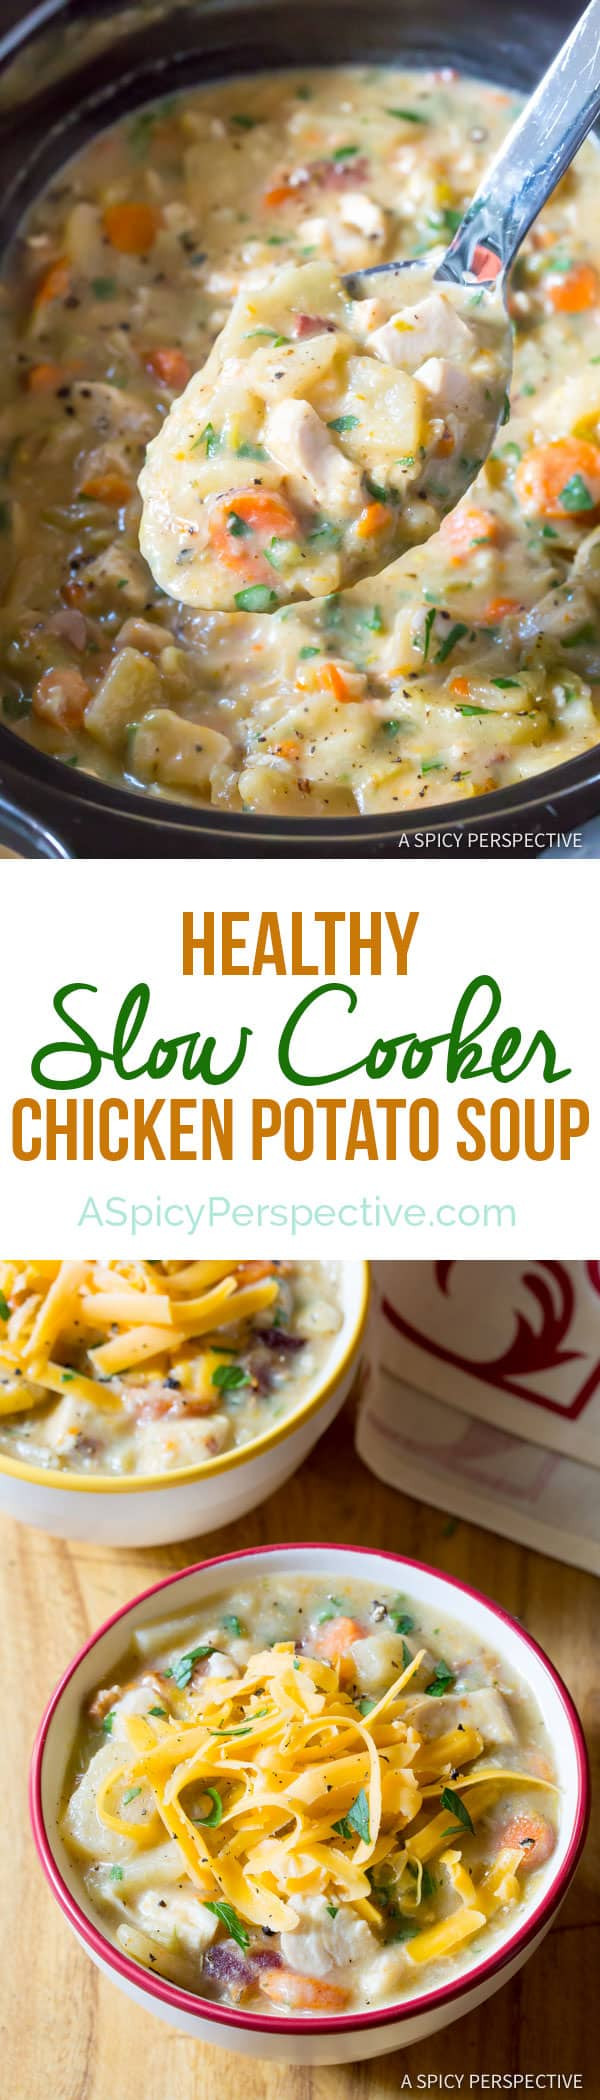 Chicken Potato Soup Slow Cooker
 Healthy Slow Cooker Chicken Potato Soup VIDEO A Spicy